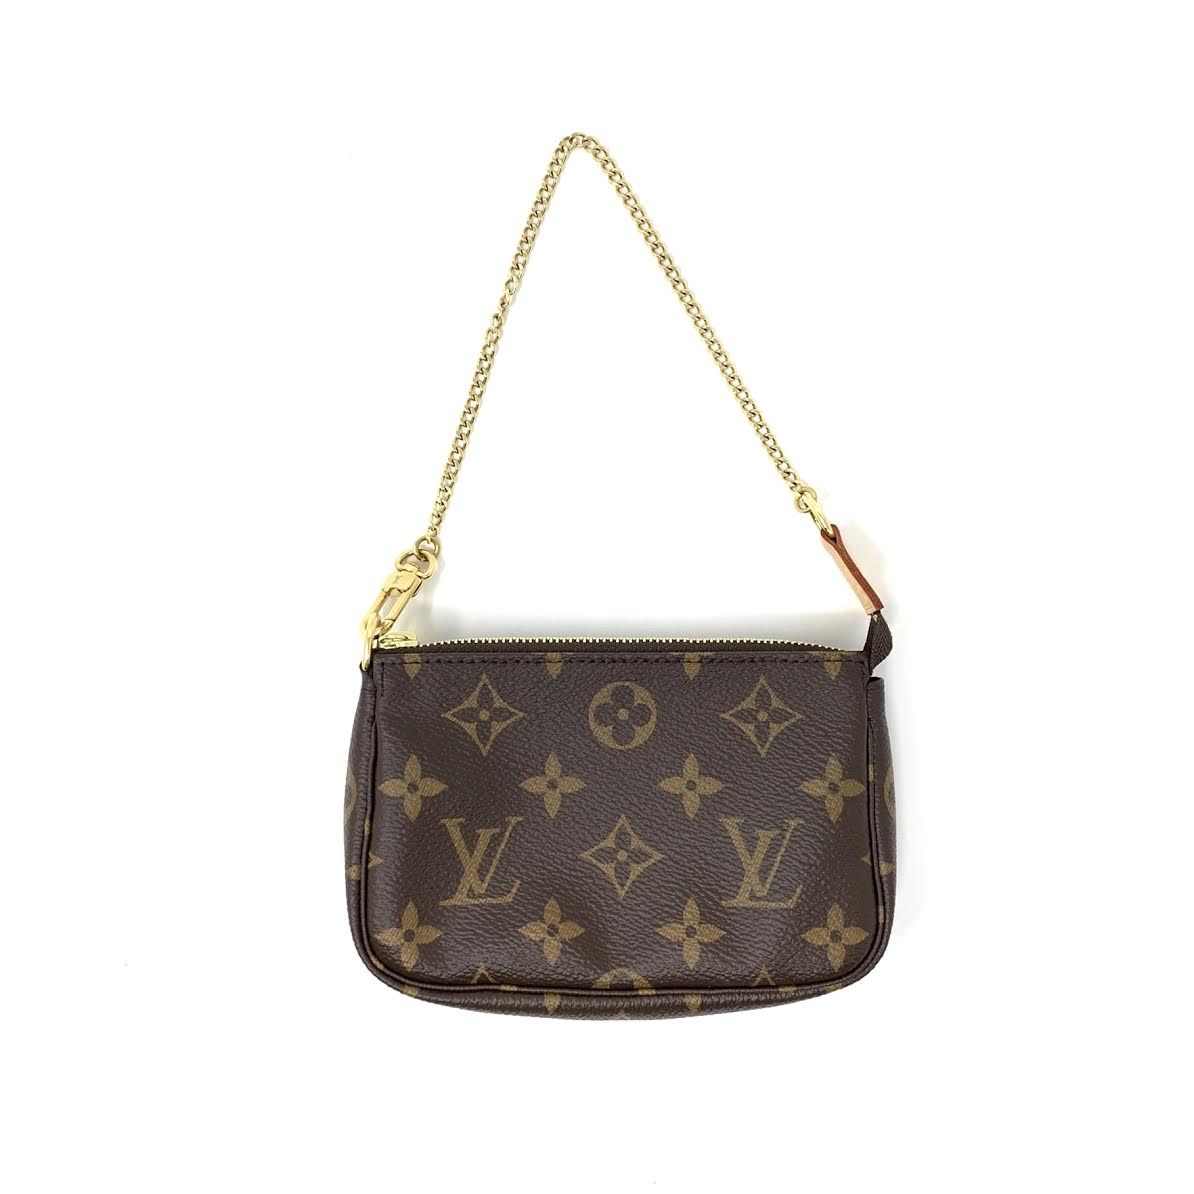 CHAIN LINK POCHETTE - LEATHER TOP HANDLE BAG in brown